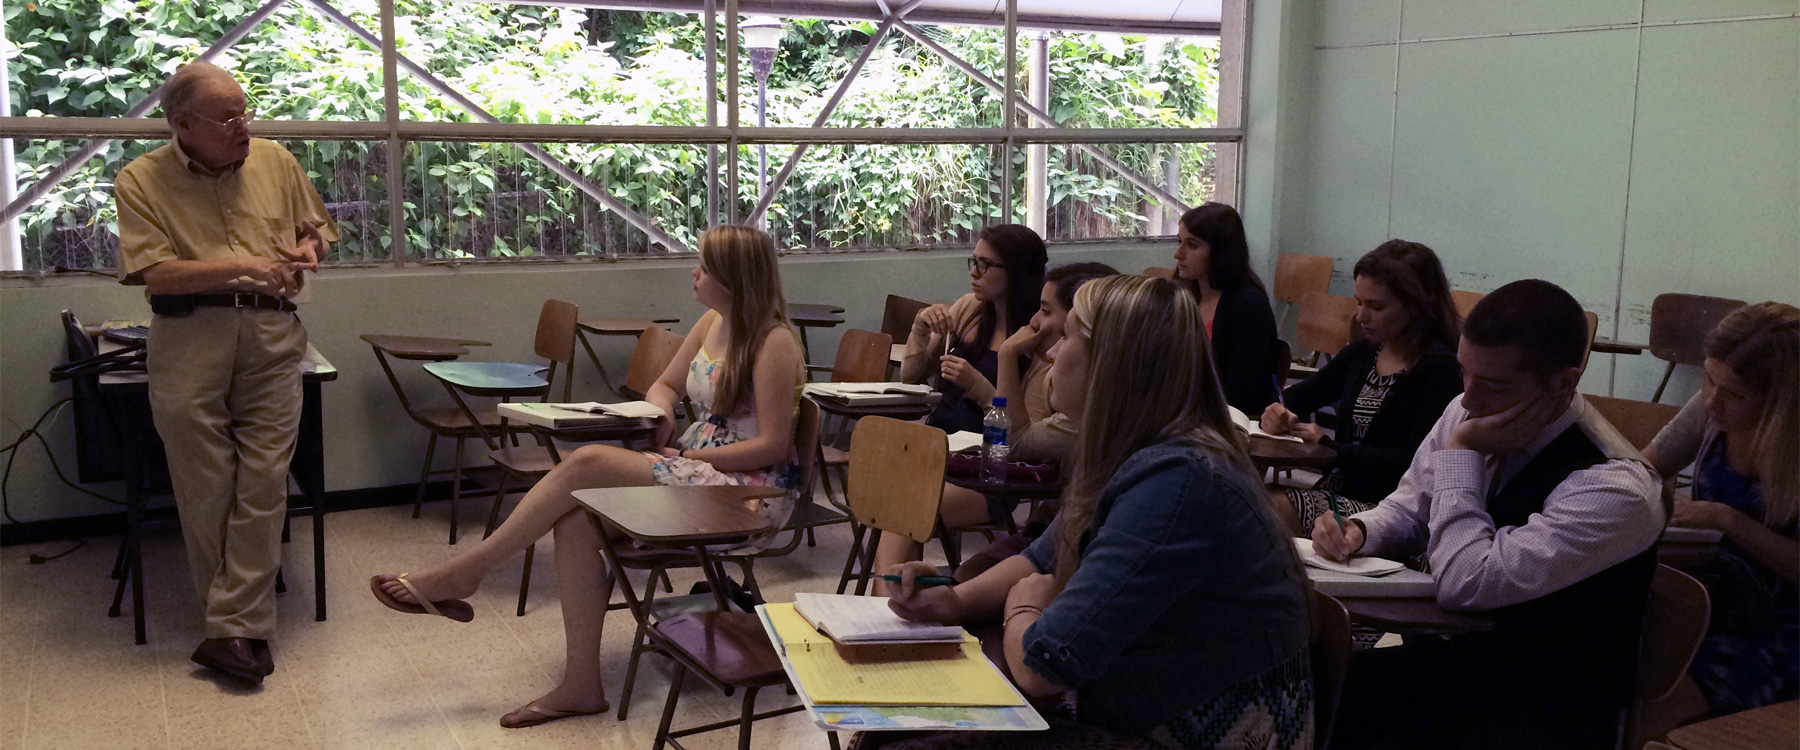 Eight students learning in Costa Rica